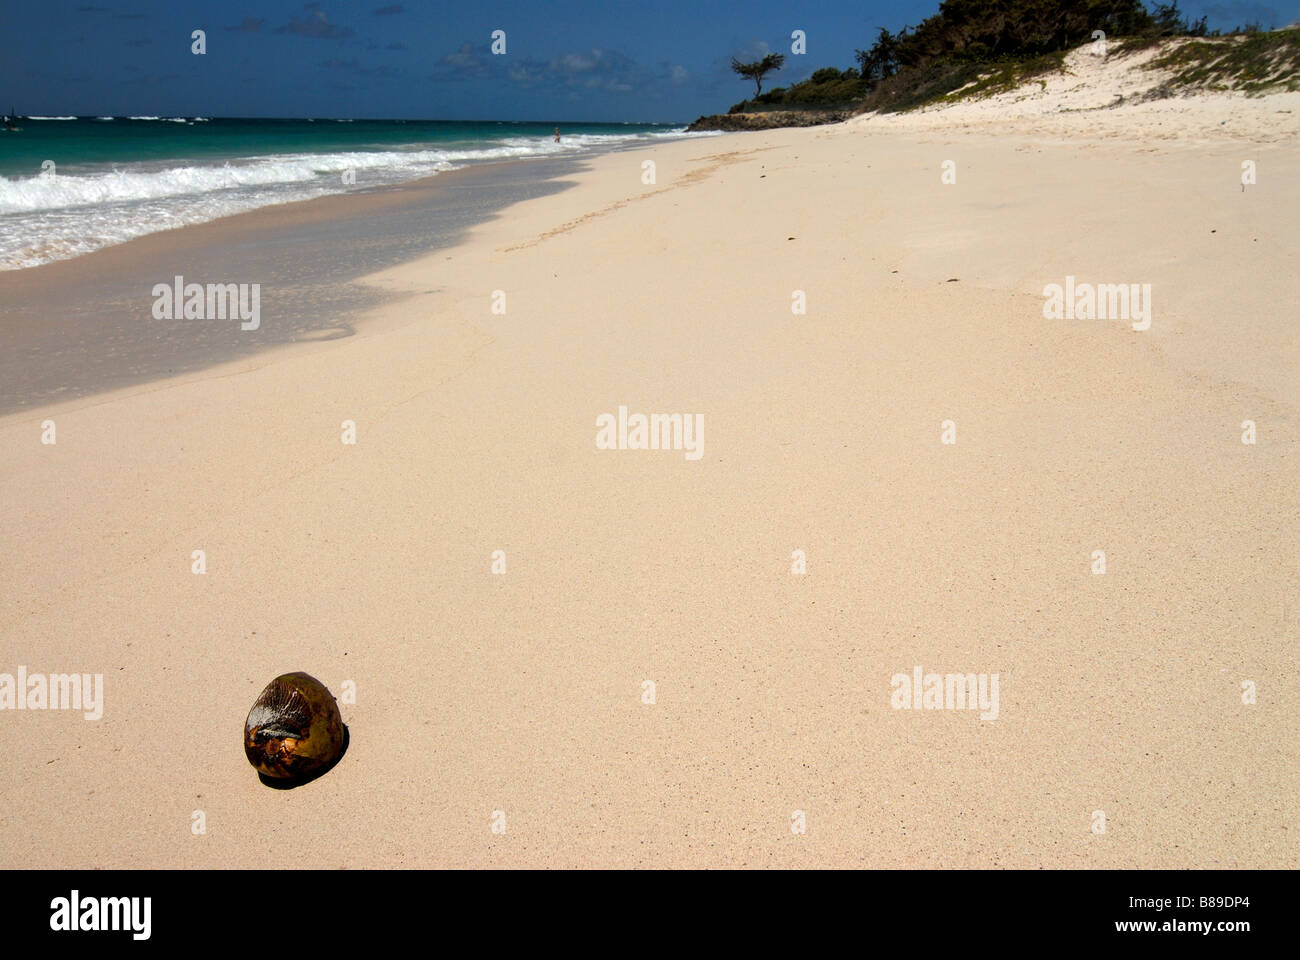 A coconut lying alone in the sand at the Silver sand beach at Barbados Caribbean Stock Photo